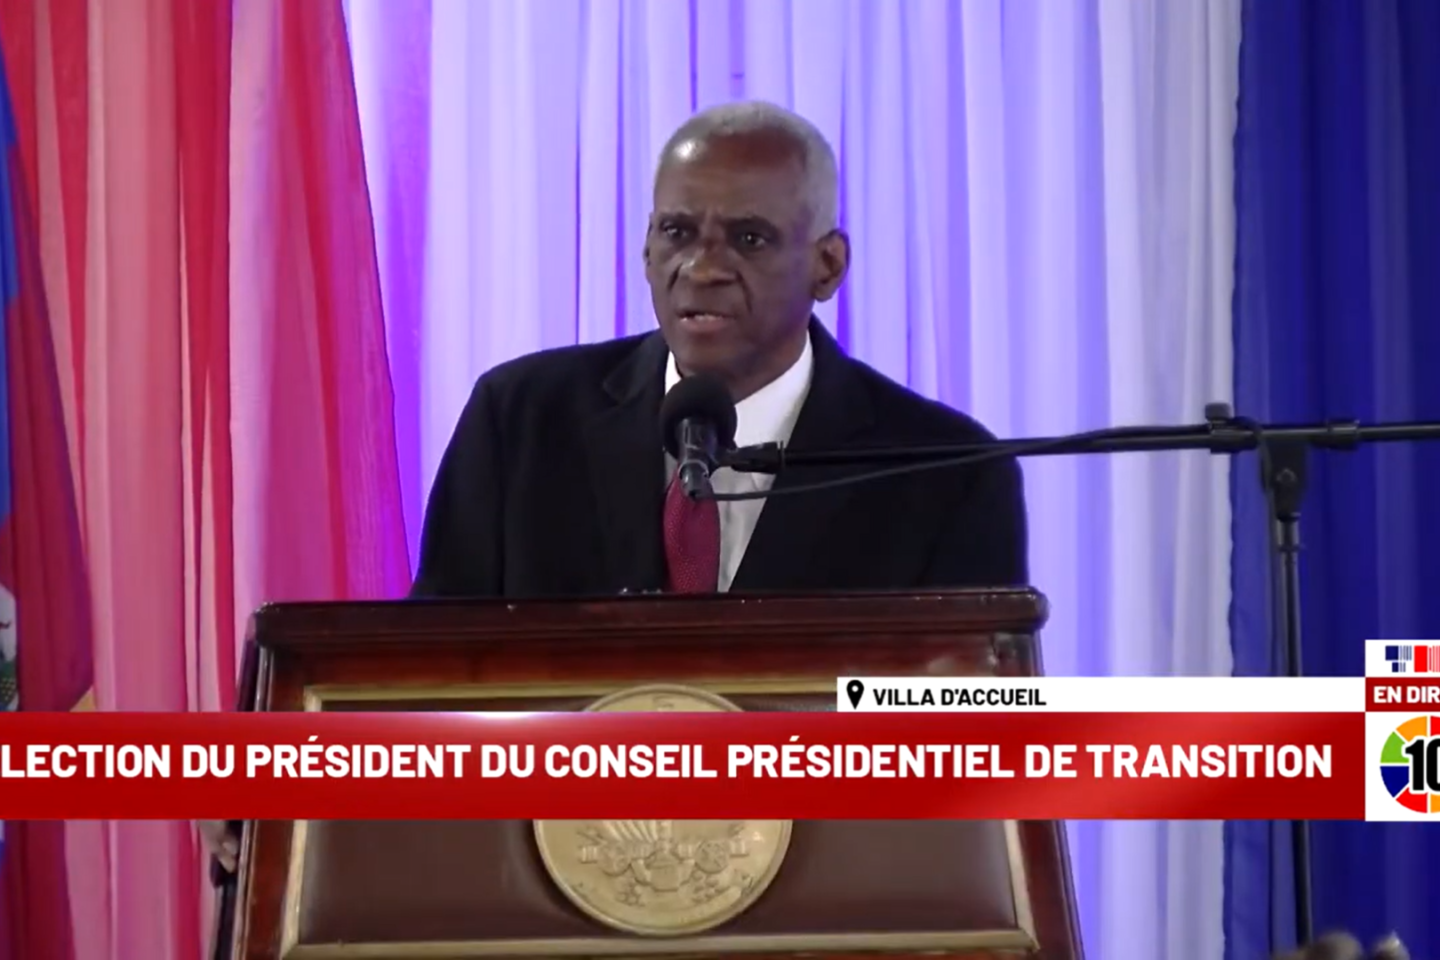 haiti-|-first-statements-by-edgard-leblanc-fils,-president-designate-of-the-cpt:-i-am-a-simple-coordinator